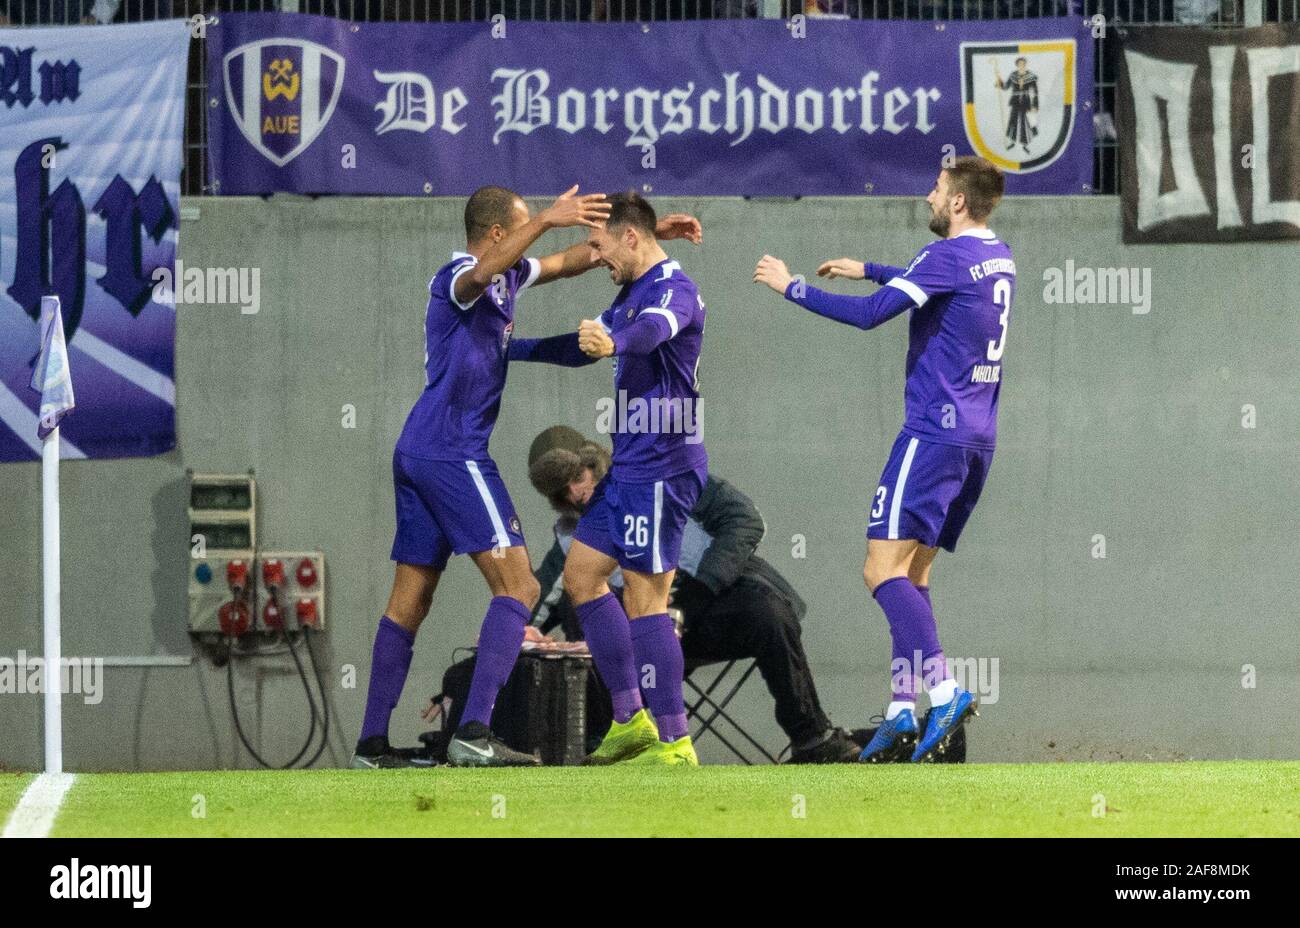 Aue, Germany. 13th Dec, 2019. Soccer: 2nd Bundesliga, FC Erzgebirge Aue - SSV Jahn Regensburg, 17th matchday, in the Sparkassen-Erzgebirgsstadion. Aues Sören Gonther (M) cheers after his goal to 1-0 with Louis Samson (l) and Marko Mihojevic. Credit: Robert Michael/dpa-Zentralbild/dpa - IMPORTANT NOTE: In accordance with the requirements of the DFL Deutsche Fußball Liga or the DFB Deutscher Fußball-Bund, it is prohibited to use or have used photographs taken in the stadium and/or the match in the form of sequence images and/or video-like photo sequences./dpa/Alamy Live News Stock Photo